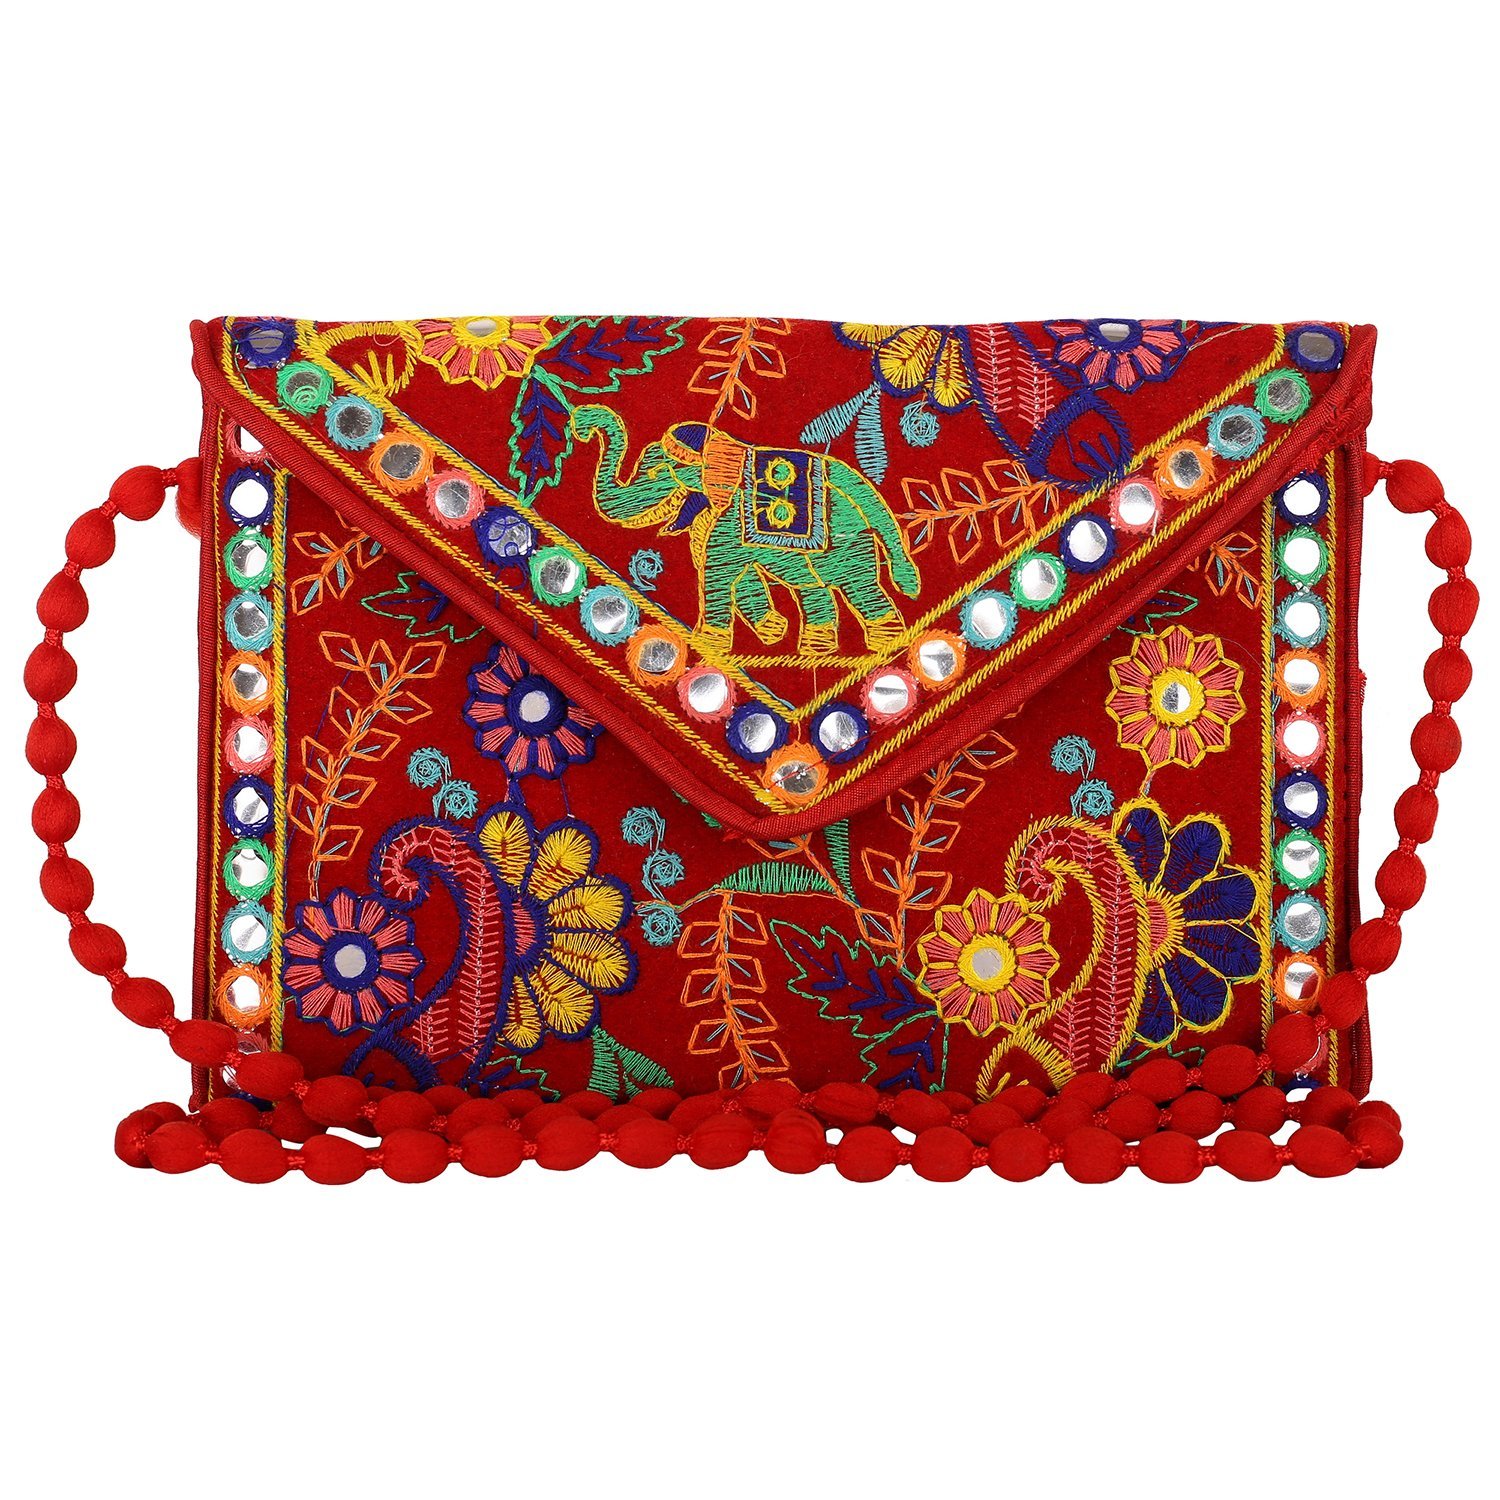 Buy Rajasthani Clutch Purse, Bag With Zardozi Work, Floral Pattern,  Shoulder Strap and Handle for Wedding, Evening Party & Traditional  Inspired. Online in India - Etsy